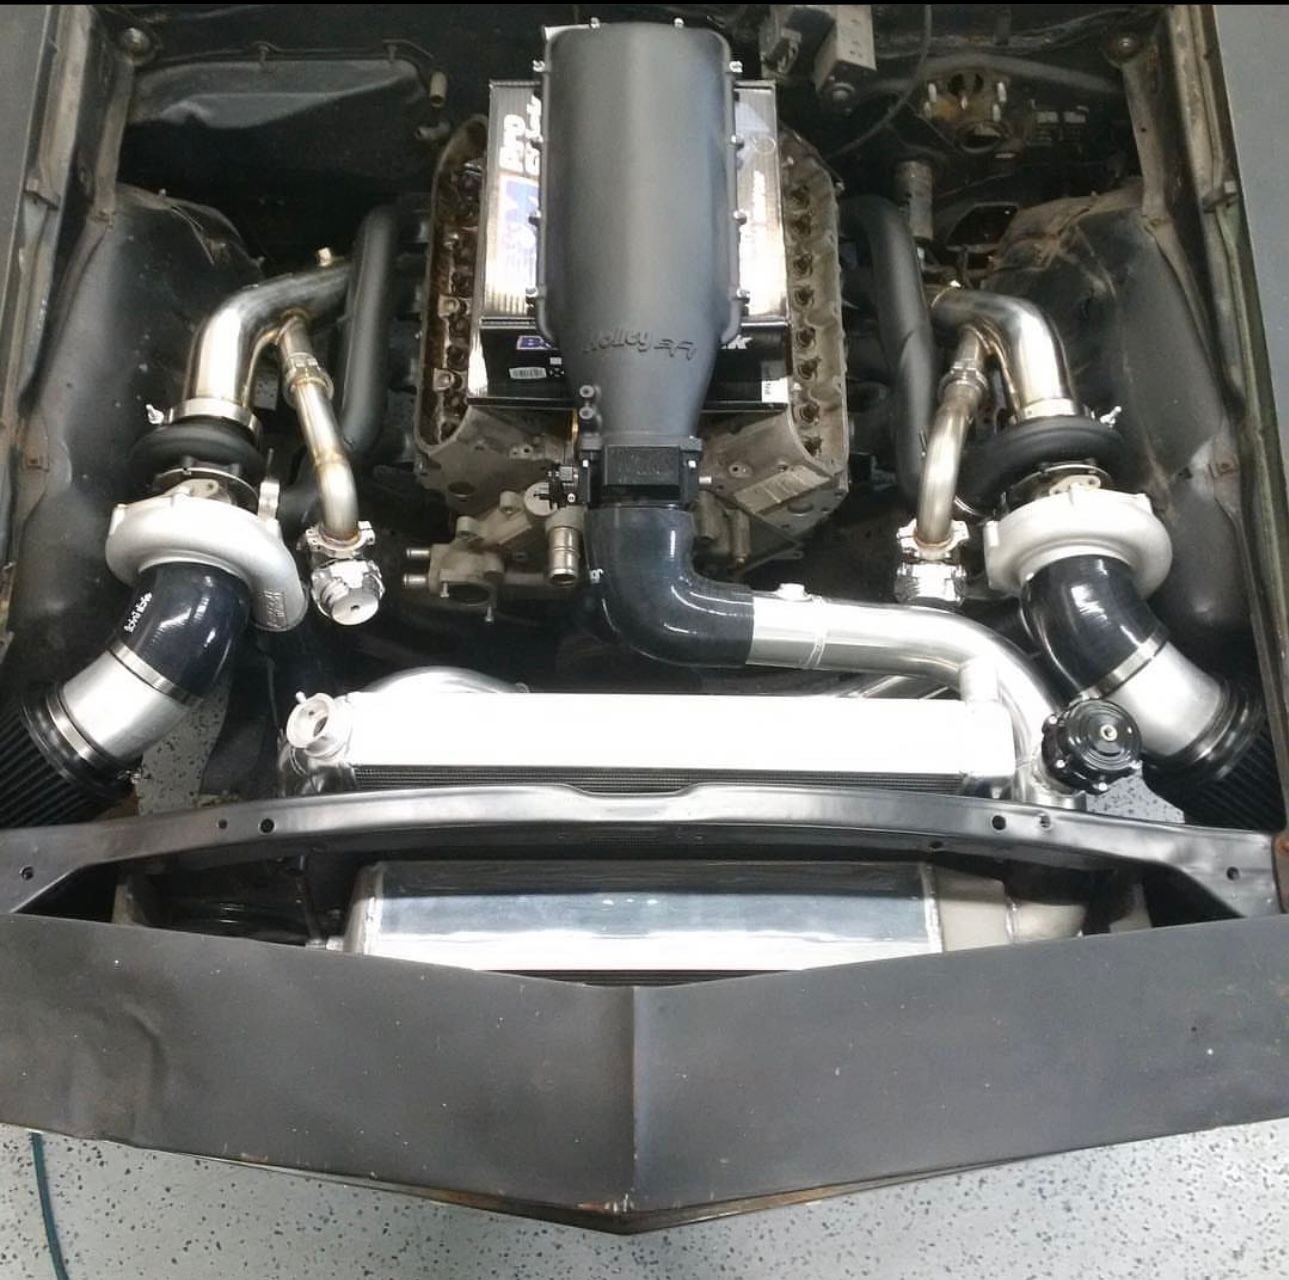 Engine - Complete - 427 dart block and twin turbo kit - New - 1968 to 1969 Chevrolet Camaro - Marysville, CA 95901, United States